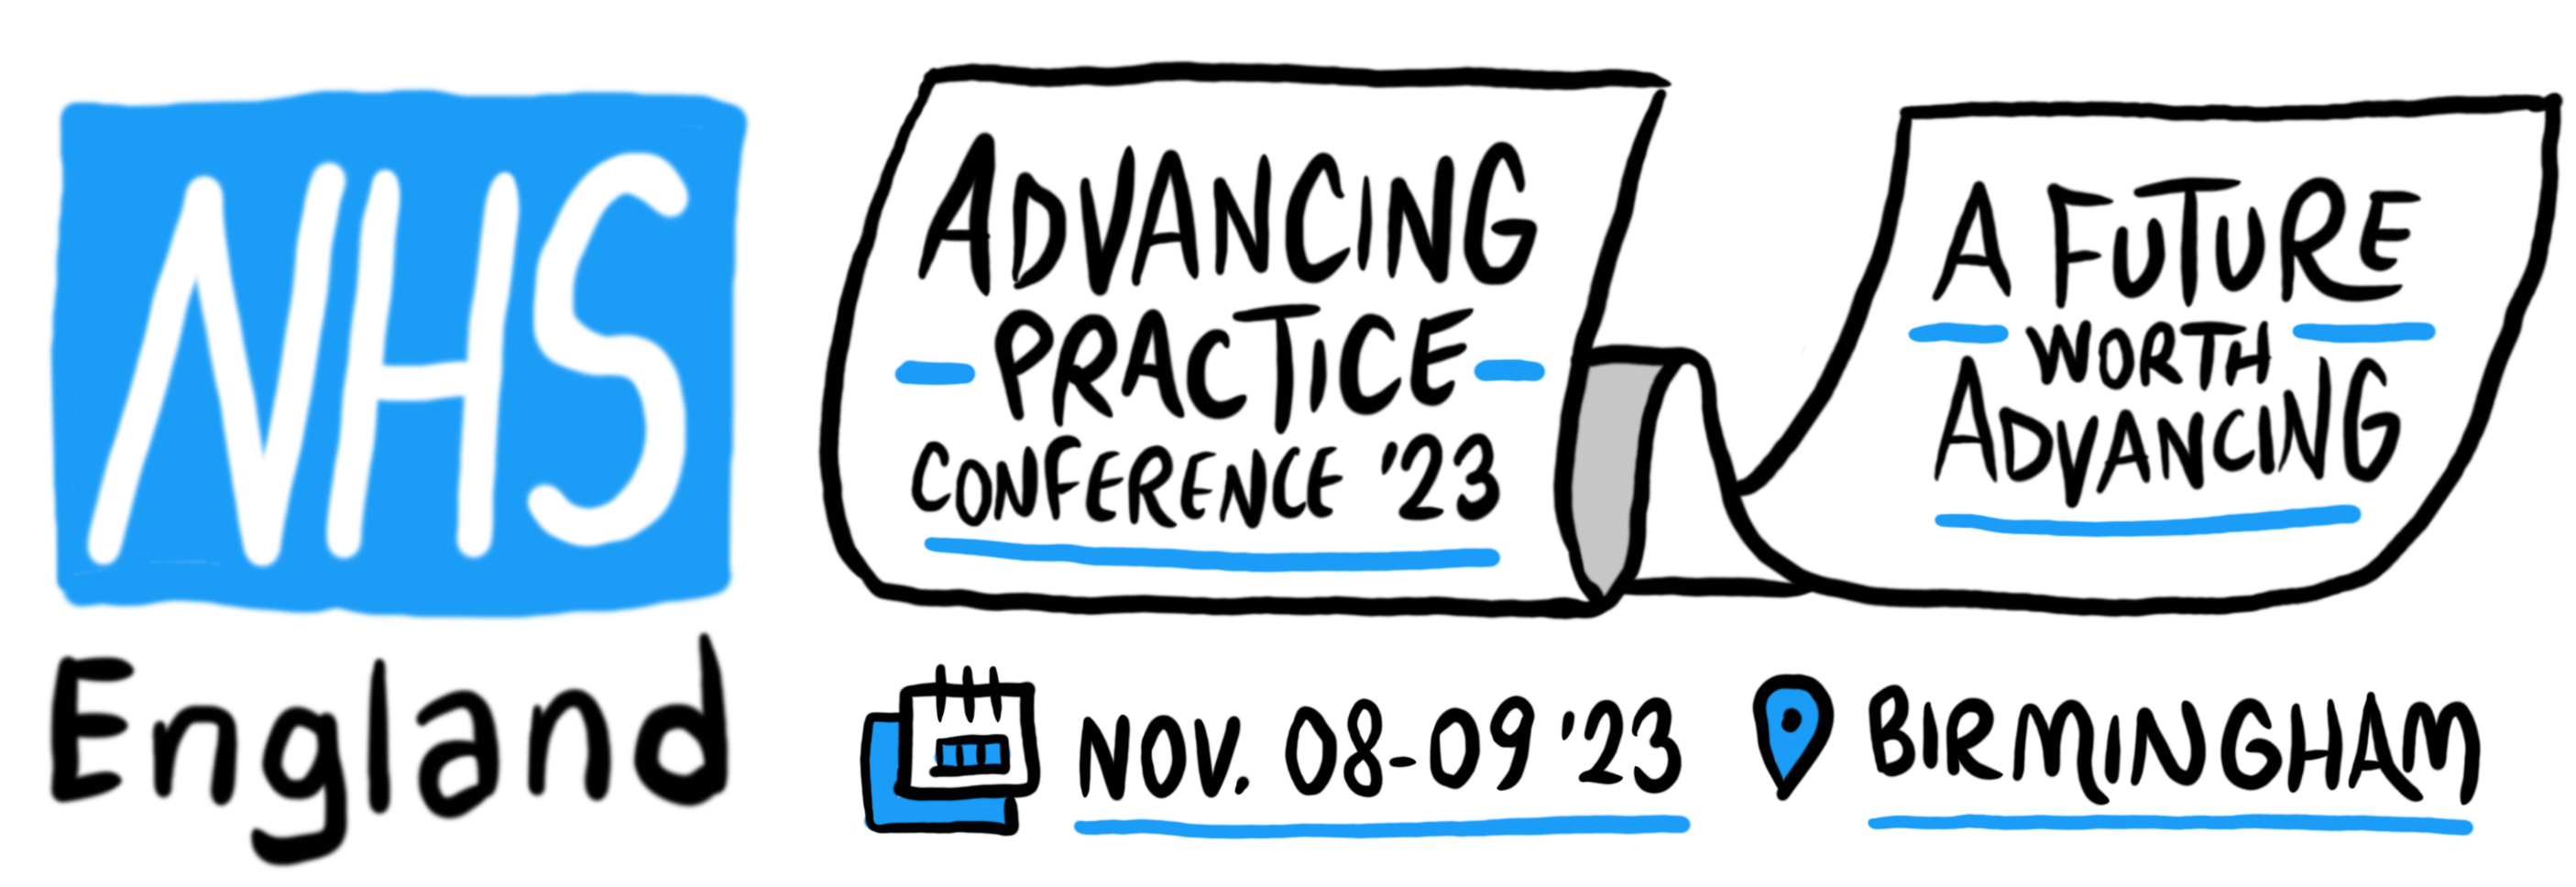 Centre for Advancing Practice Conference 2023